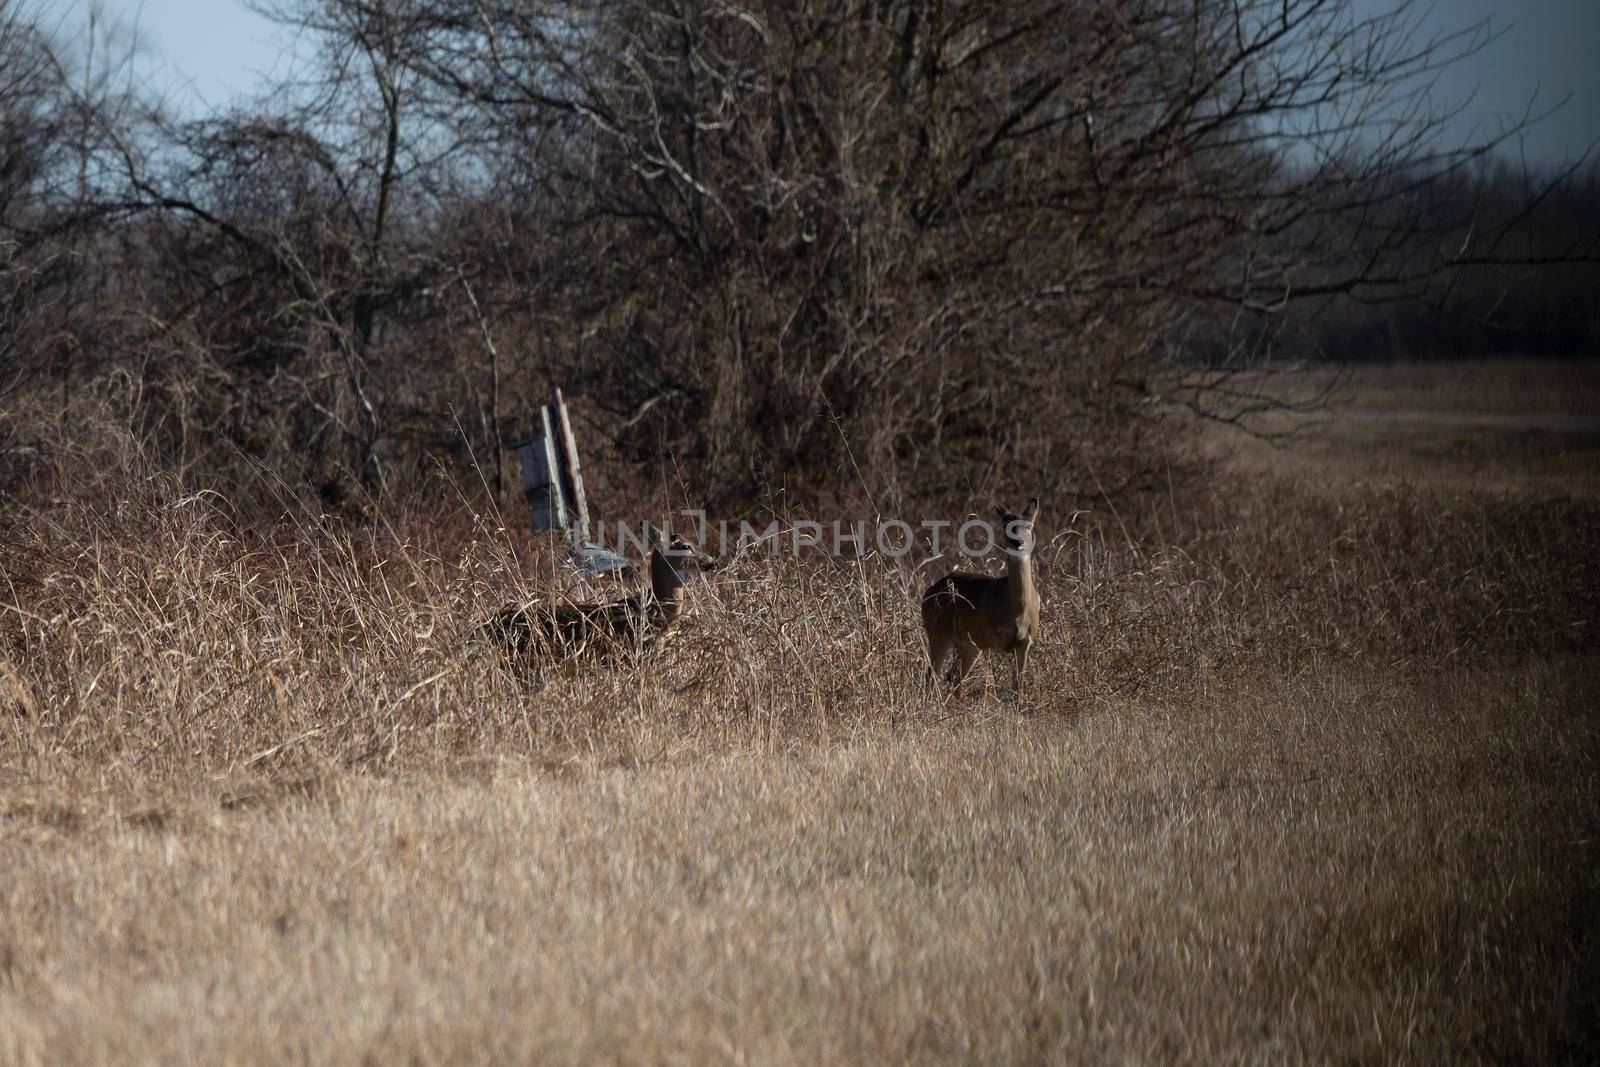 Pair of white-tailed deer does (Odocoileus virginianus) standing in camouflage, while one looks on alert and the other watches the alert deer